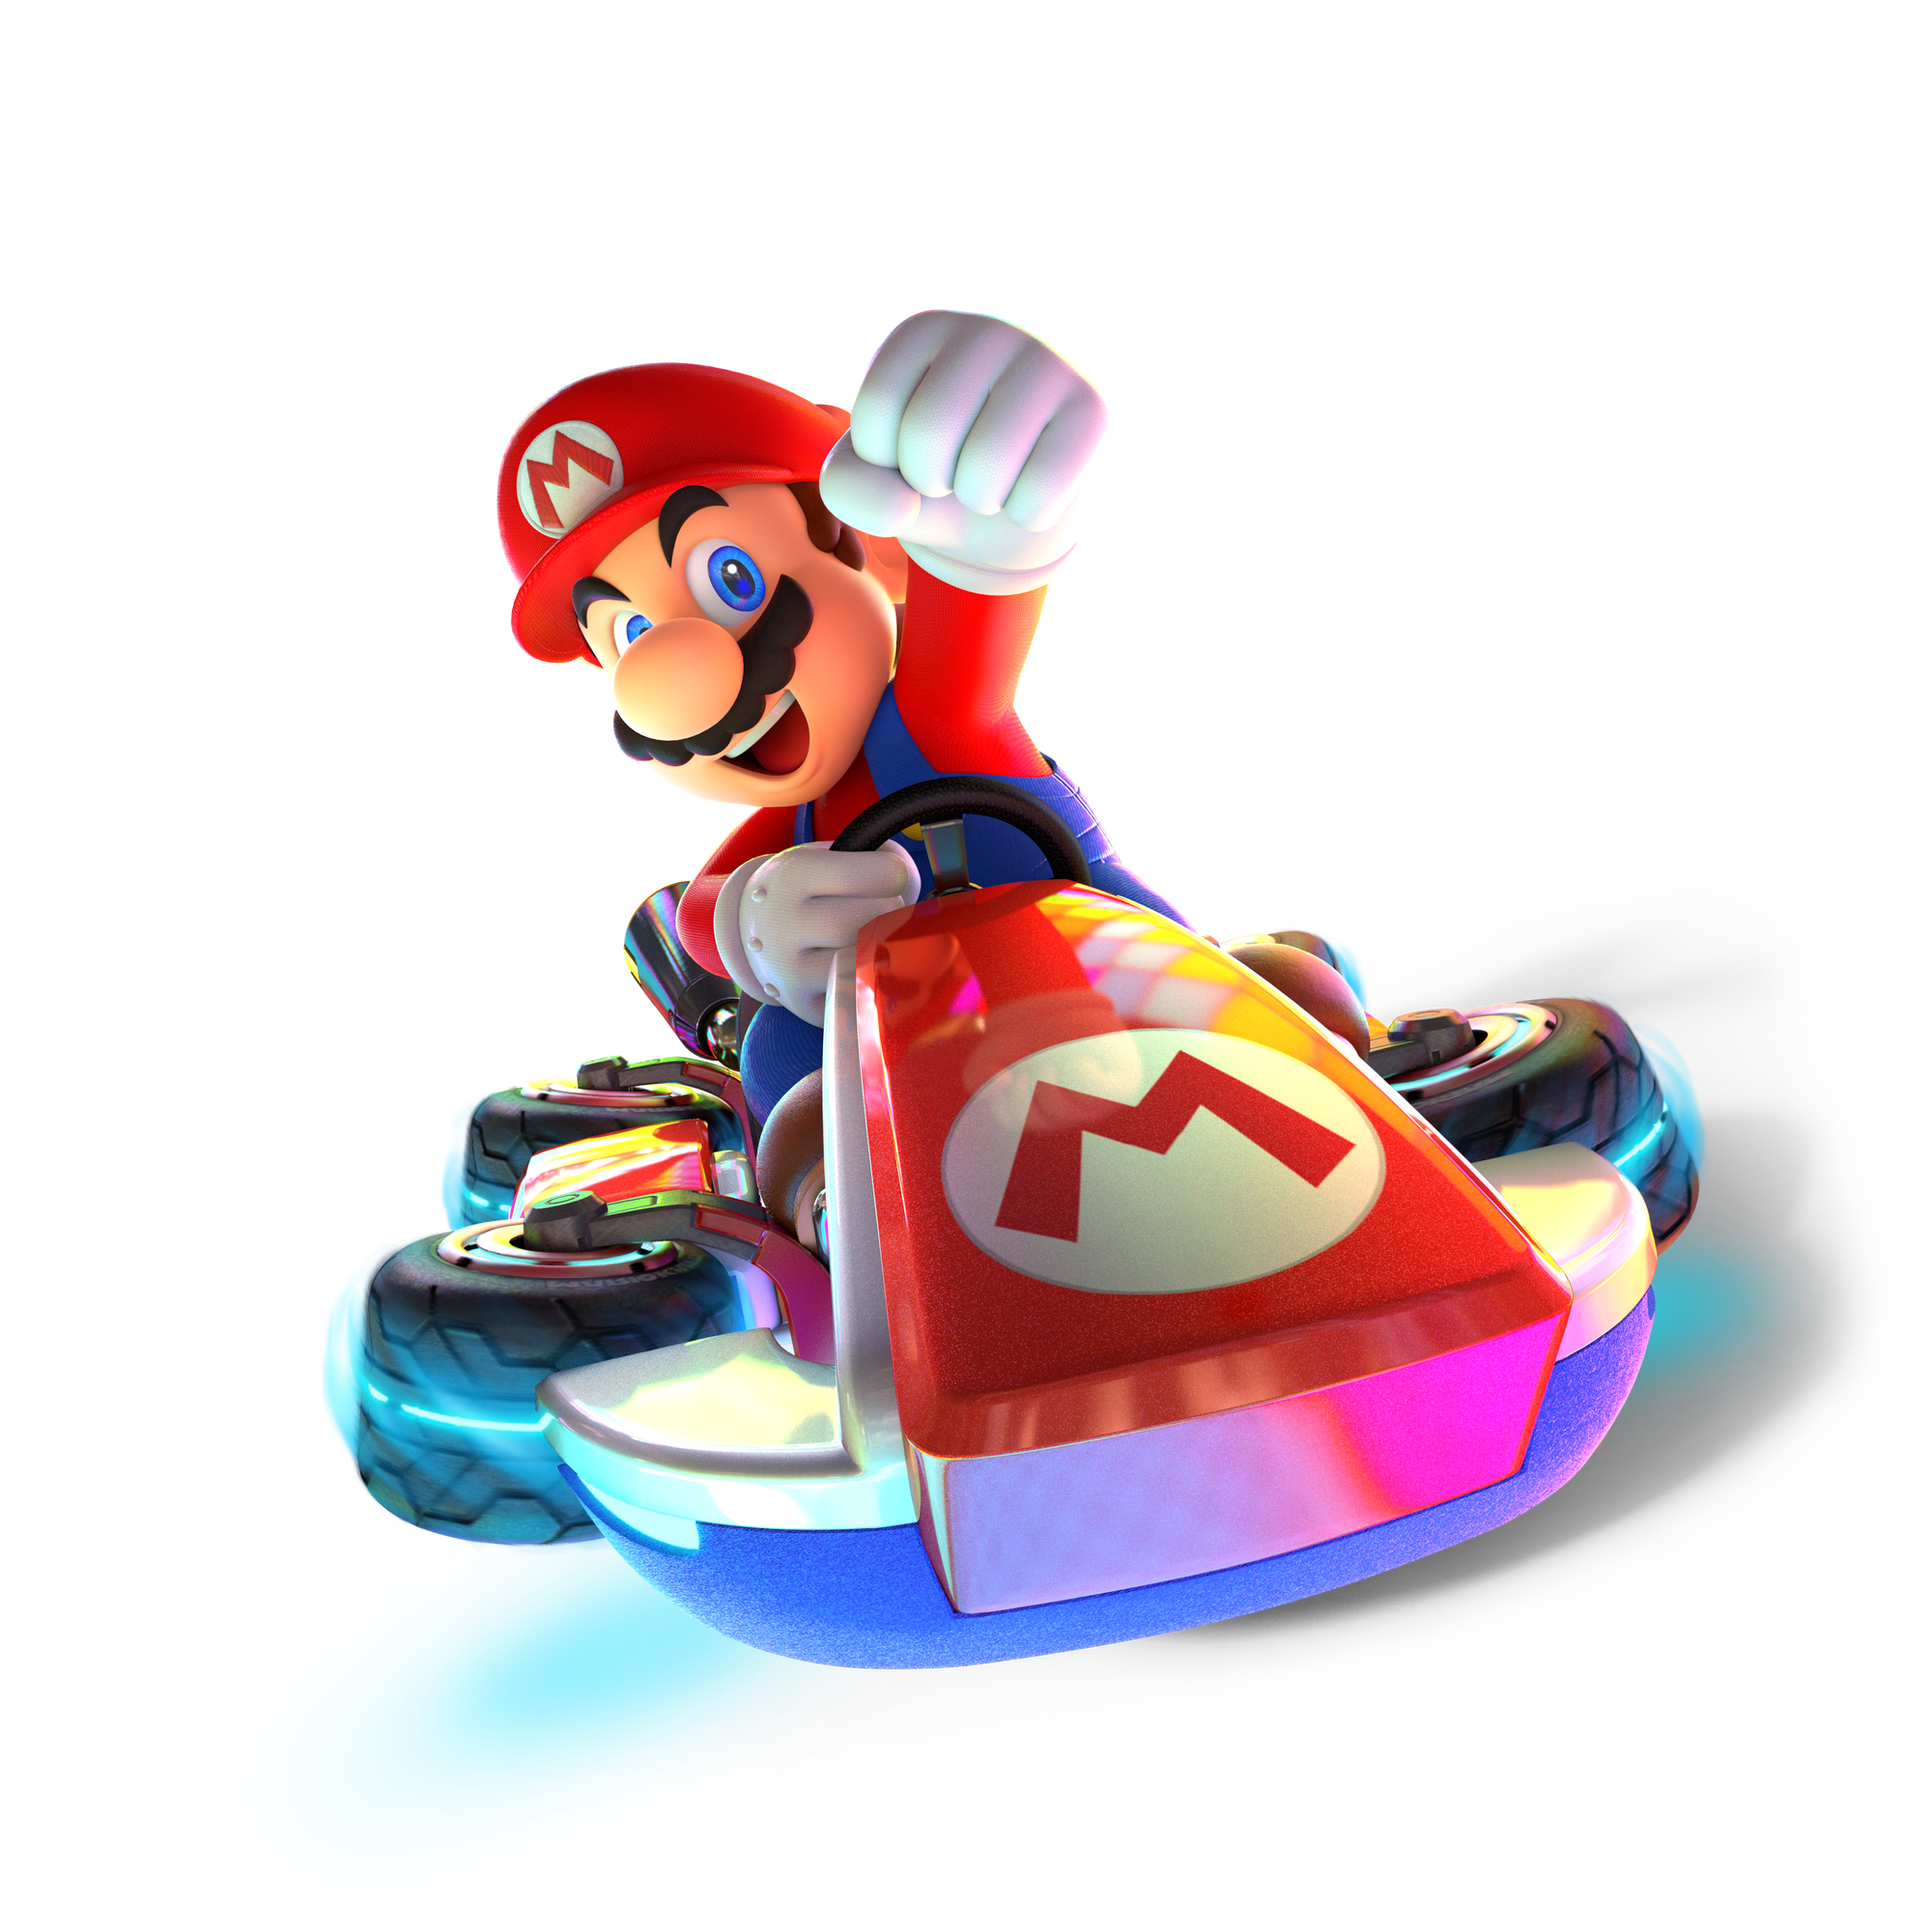 Image Mario Kart 8 Deluxe Character Artwork 01png Nintendo Fandom Powered By Wikia 9030